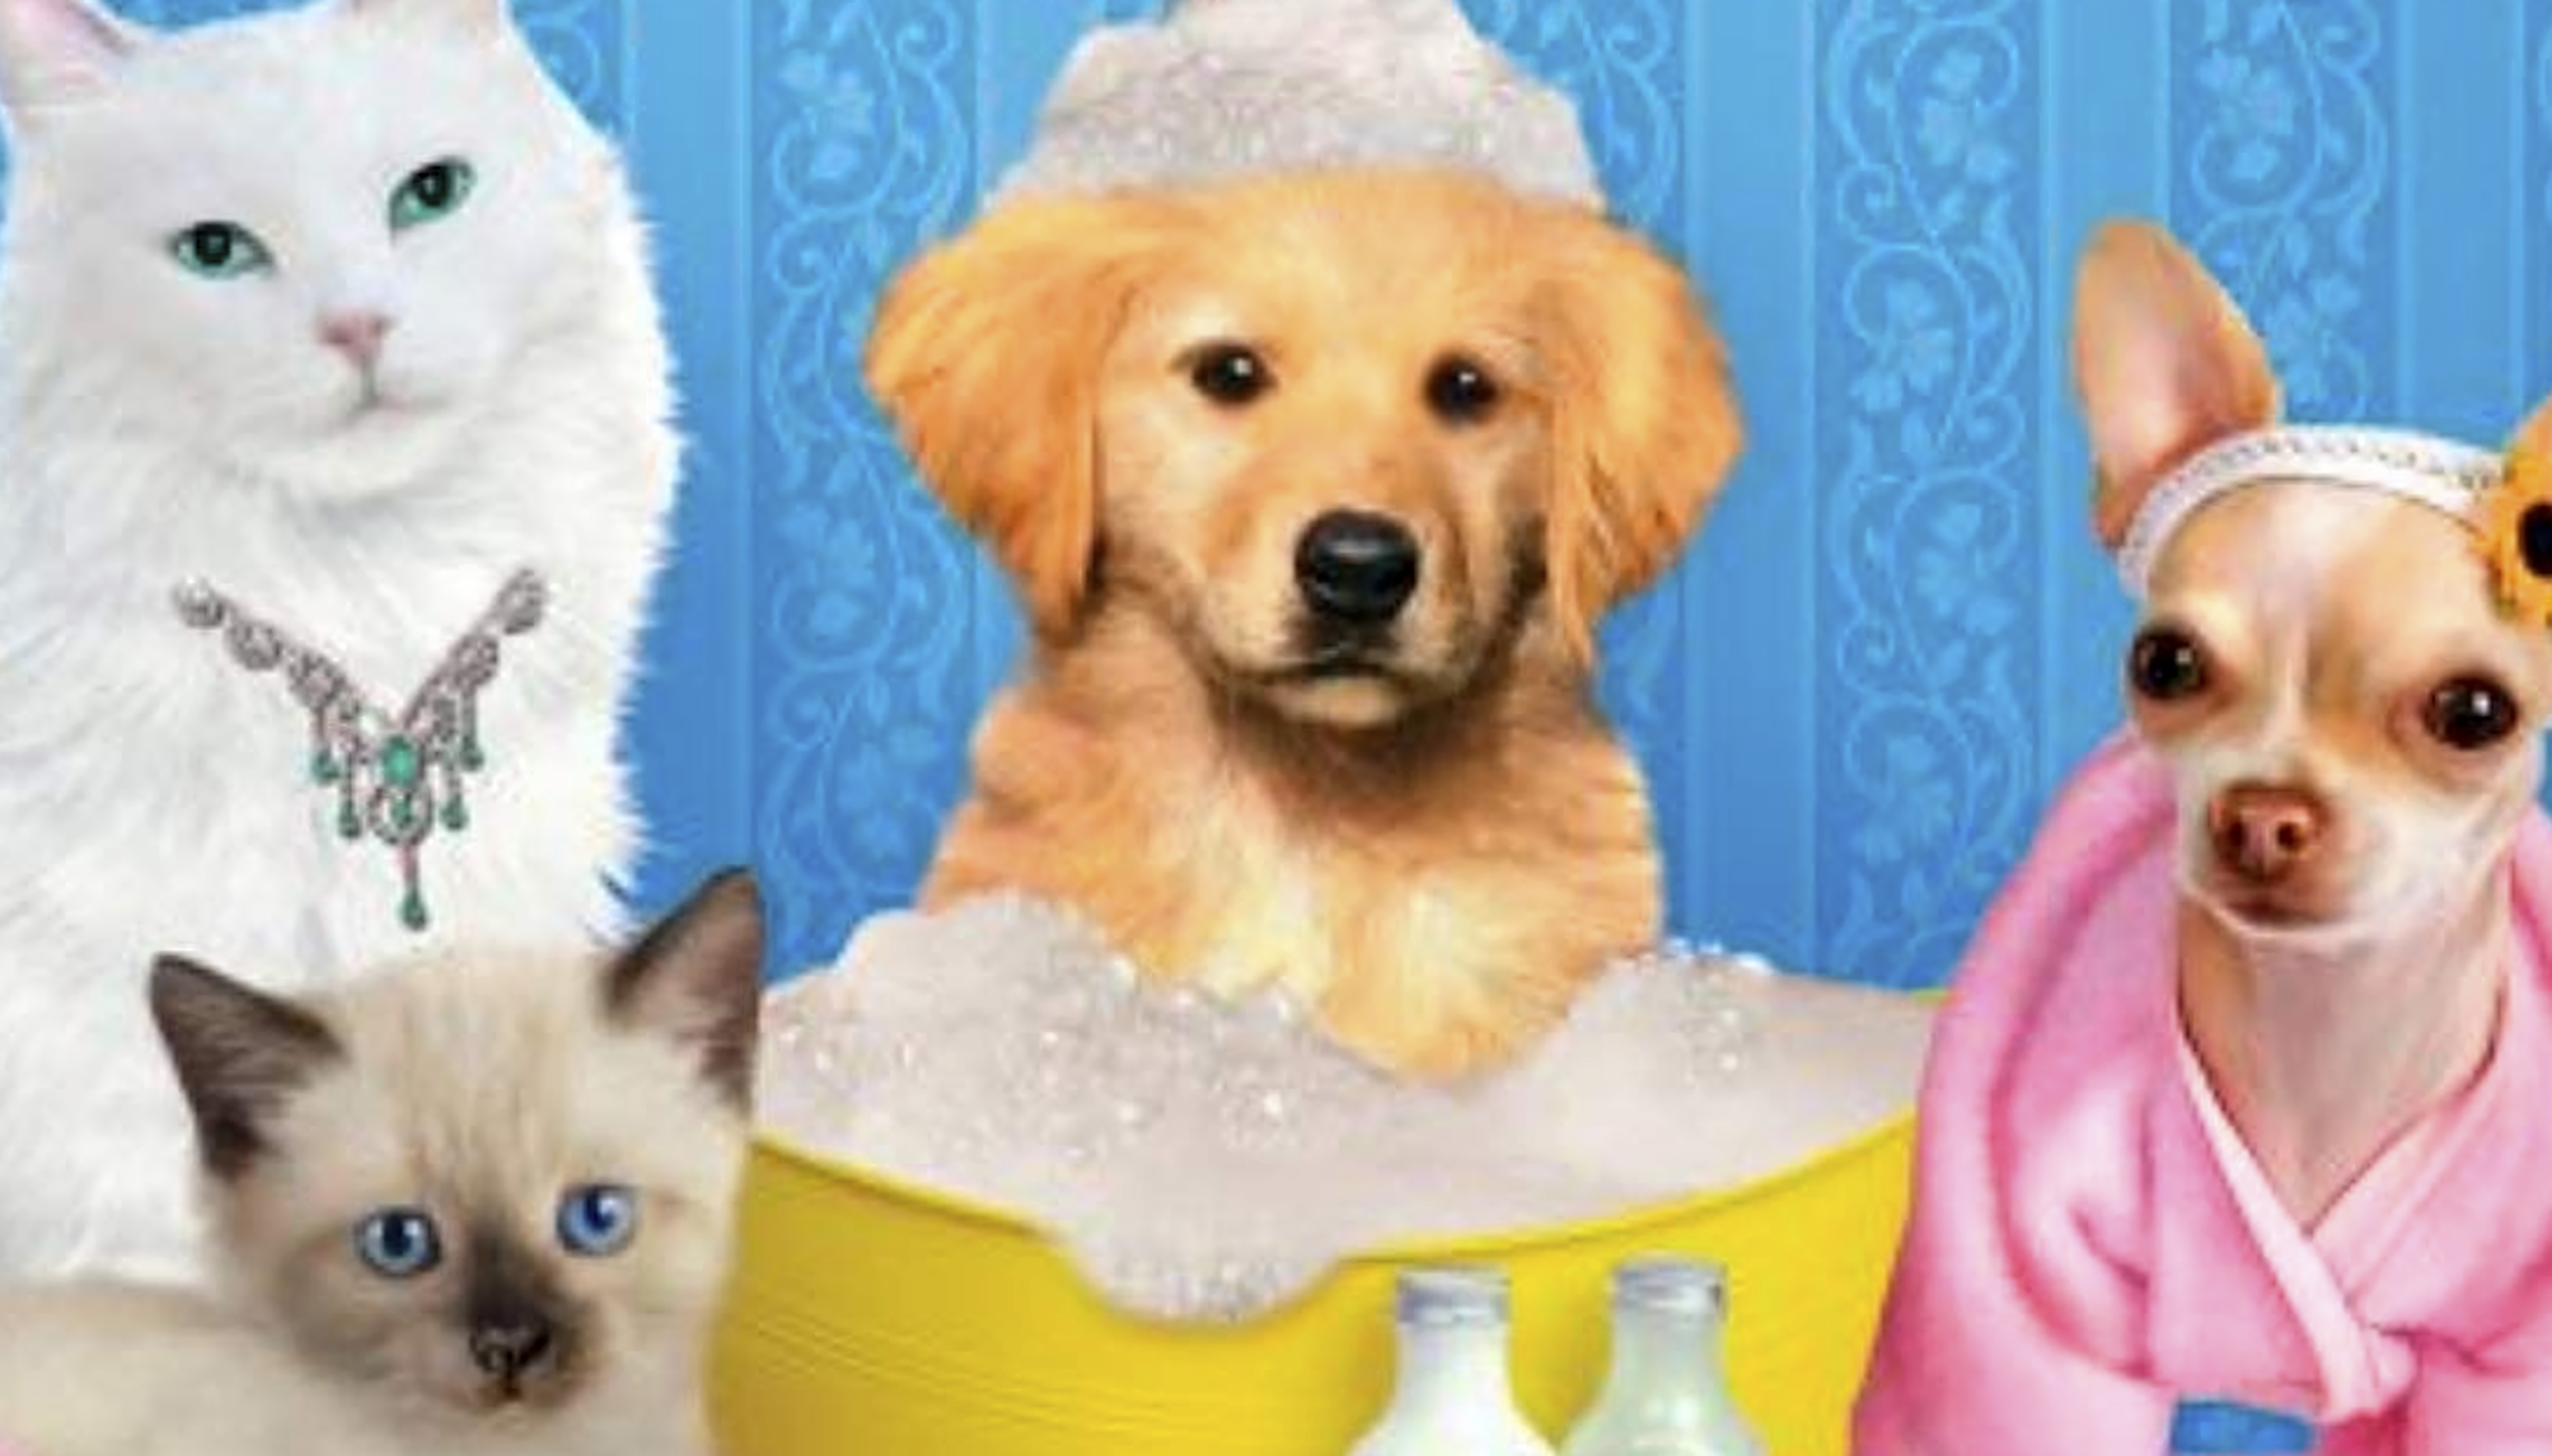 Paws & Claws: Pampered Pets